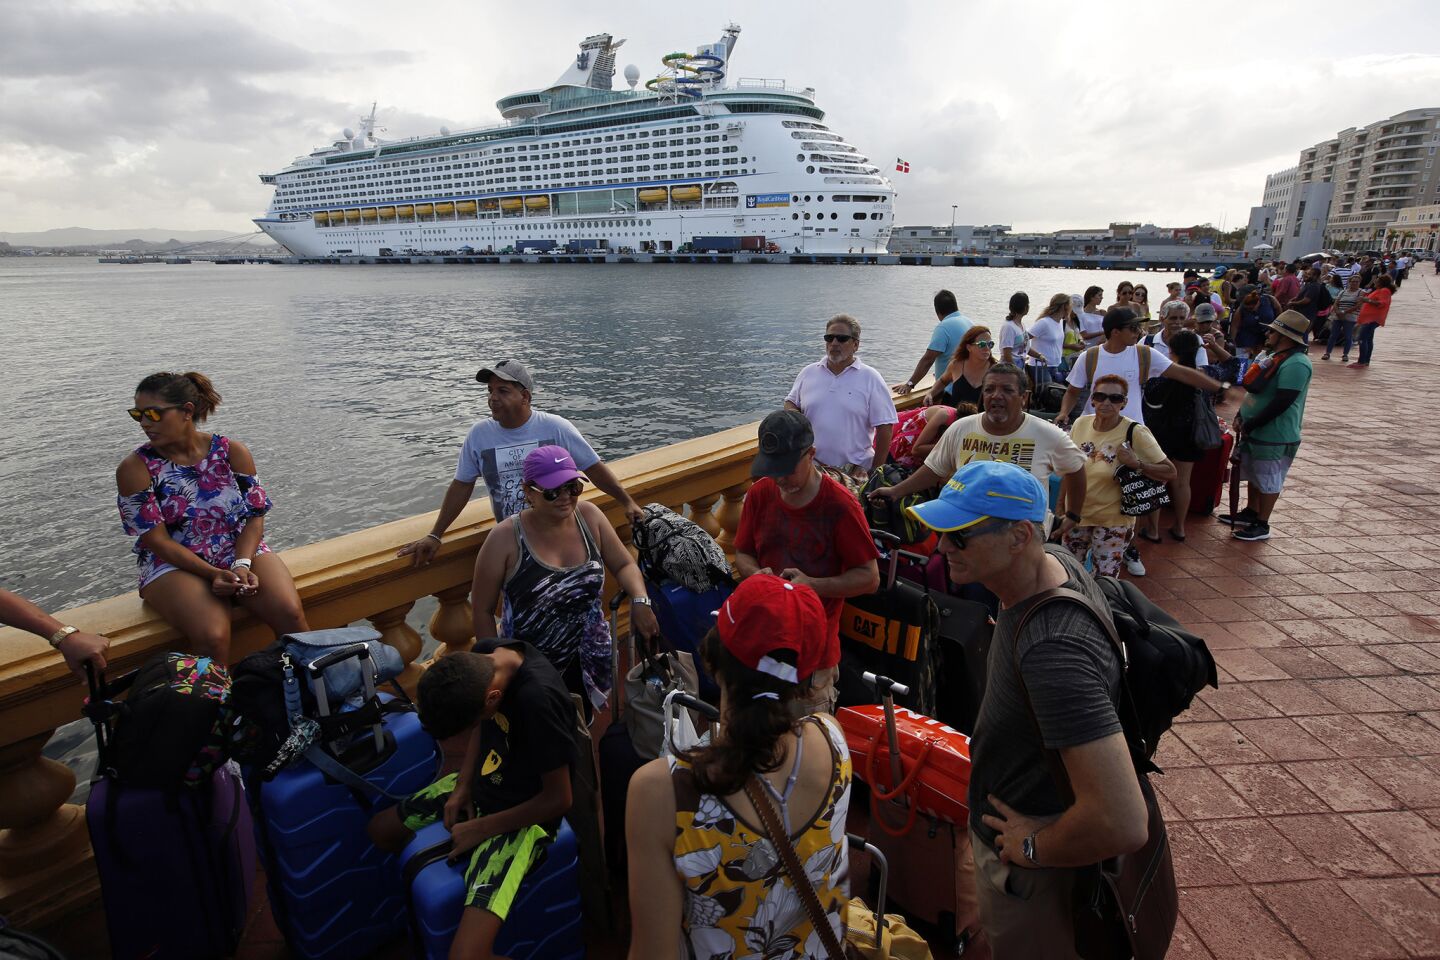 A Royal Caribbean cruise ship is evacuating over 2,000 people from Puerto Rico, St. John, and St. Thomas.